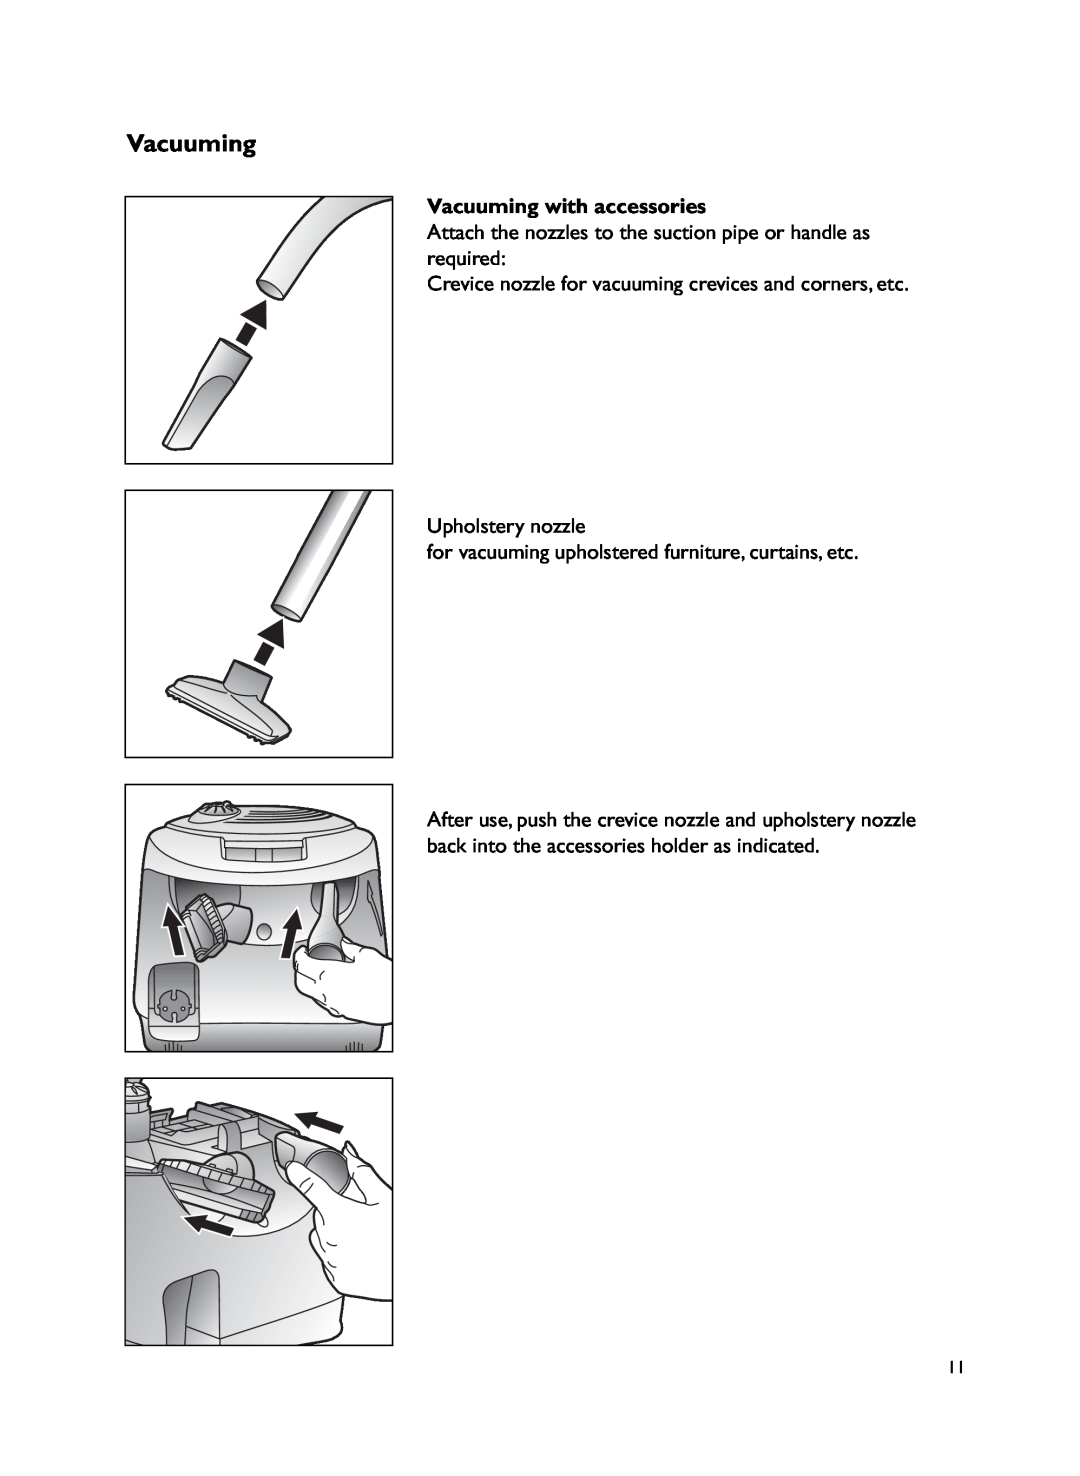 John Lewis JLVS06 instruction manual Vacuuming with accessories, Upholstery nozzle 